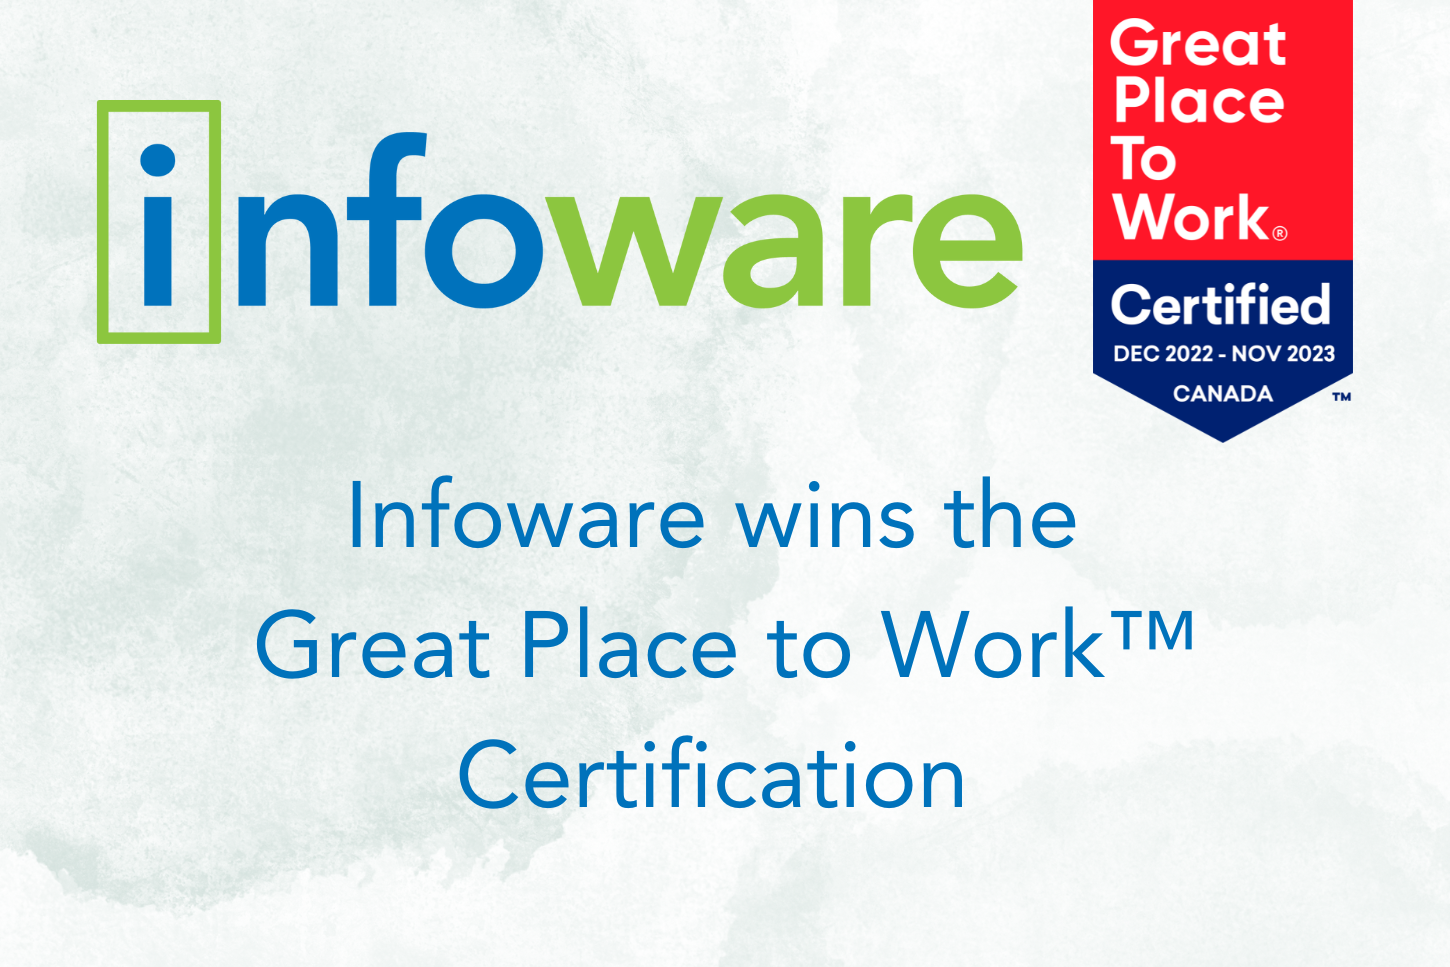 Infoware wins the Great Place to Work™ Certification